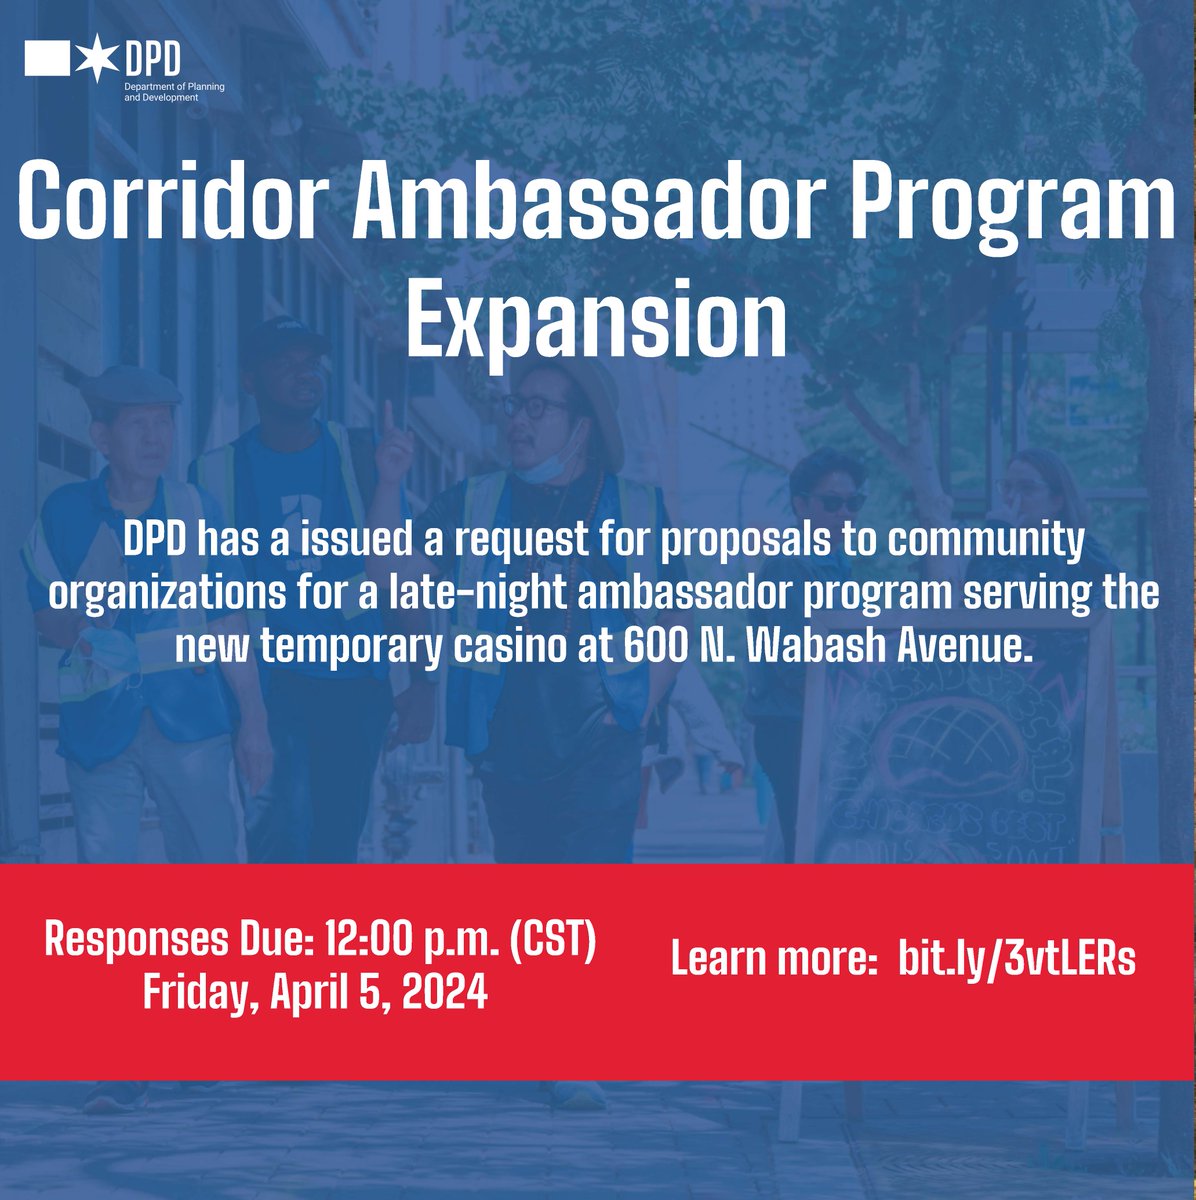 Reminder! DPD issued an RFP to organizations to hire Corridor Ambassadors in the vicinity of the temporary casino located at 600 N. Wabash Avenue. Learn more: bit.ly/3vtLERs Responses are due: 12:00 p.m. April 5, 2024